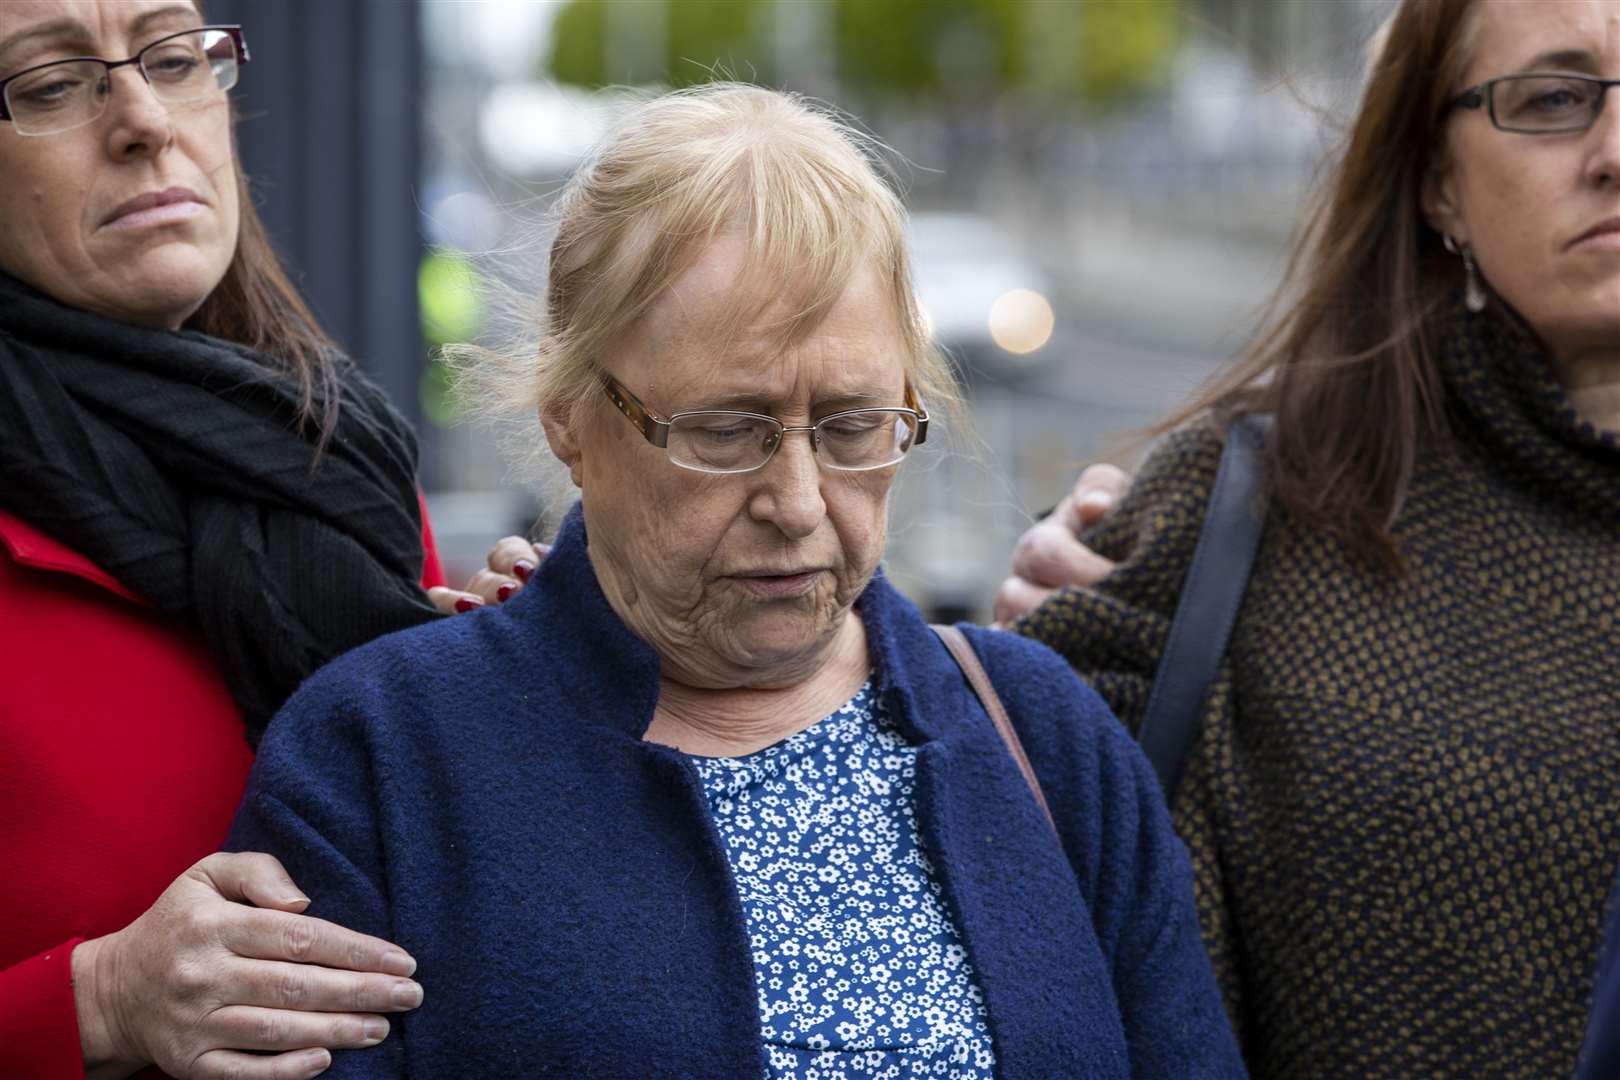 Joe McCann’s widow Anne (centre), is comforted by her daughters Nuala (left) and Aine (right) outside Belfast Crown Court (Liam McBurney/PA)